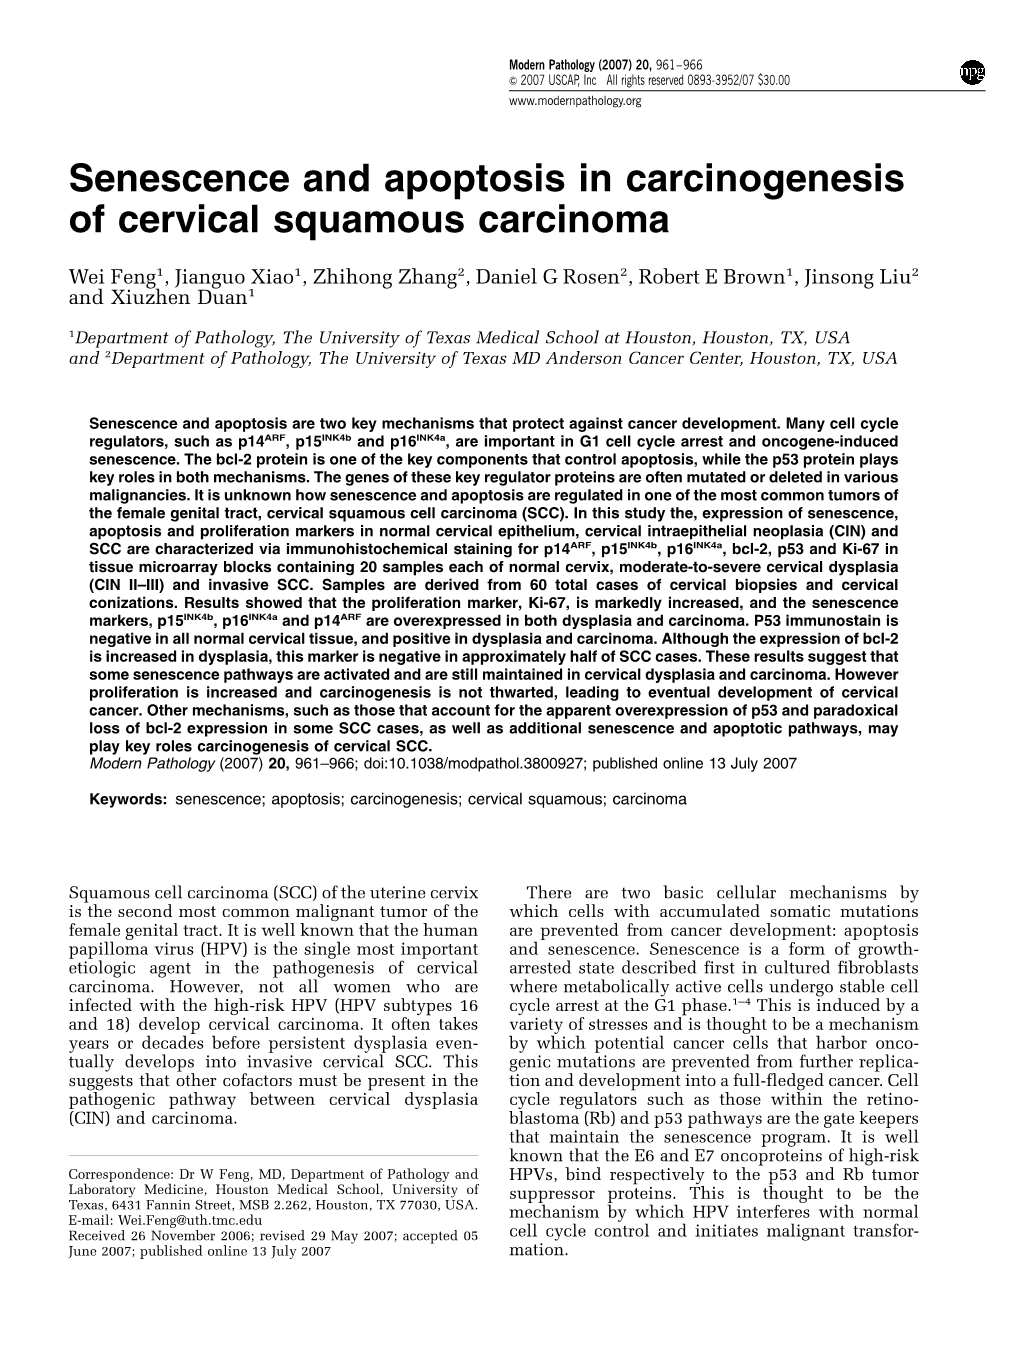 Senescence and Apoptosis in Carcinogenesis of Cervical Squamous Carcinoma